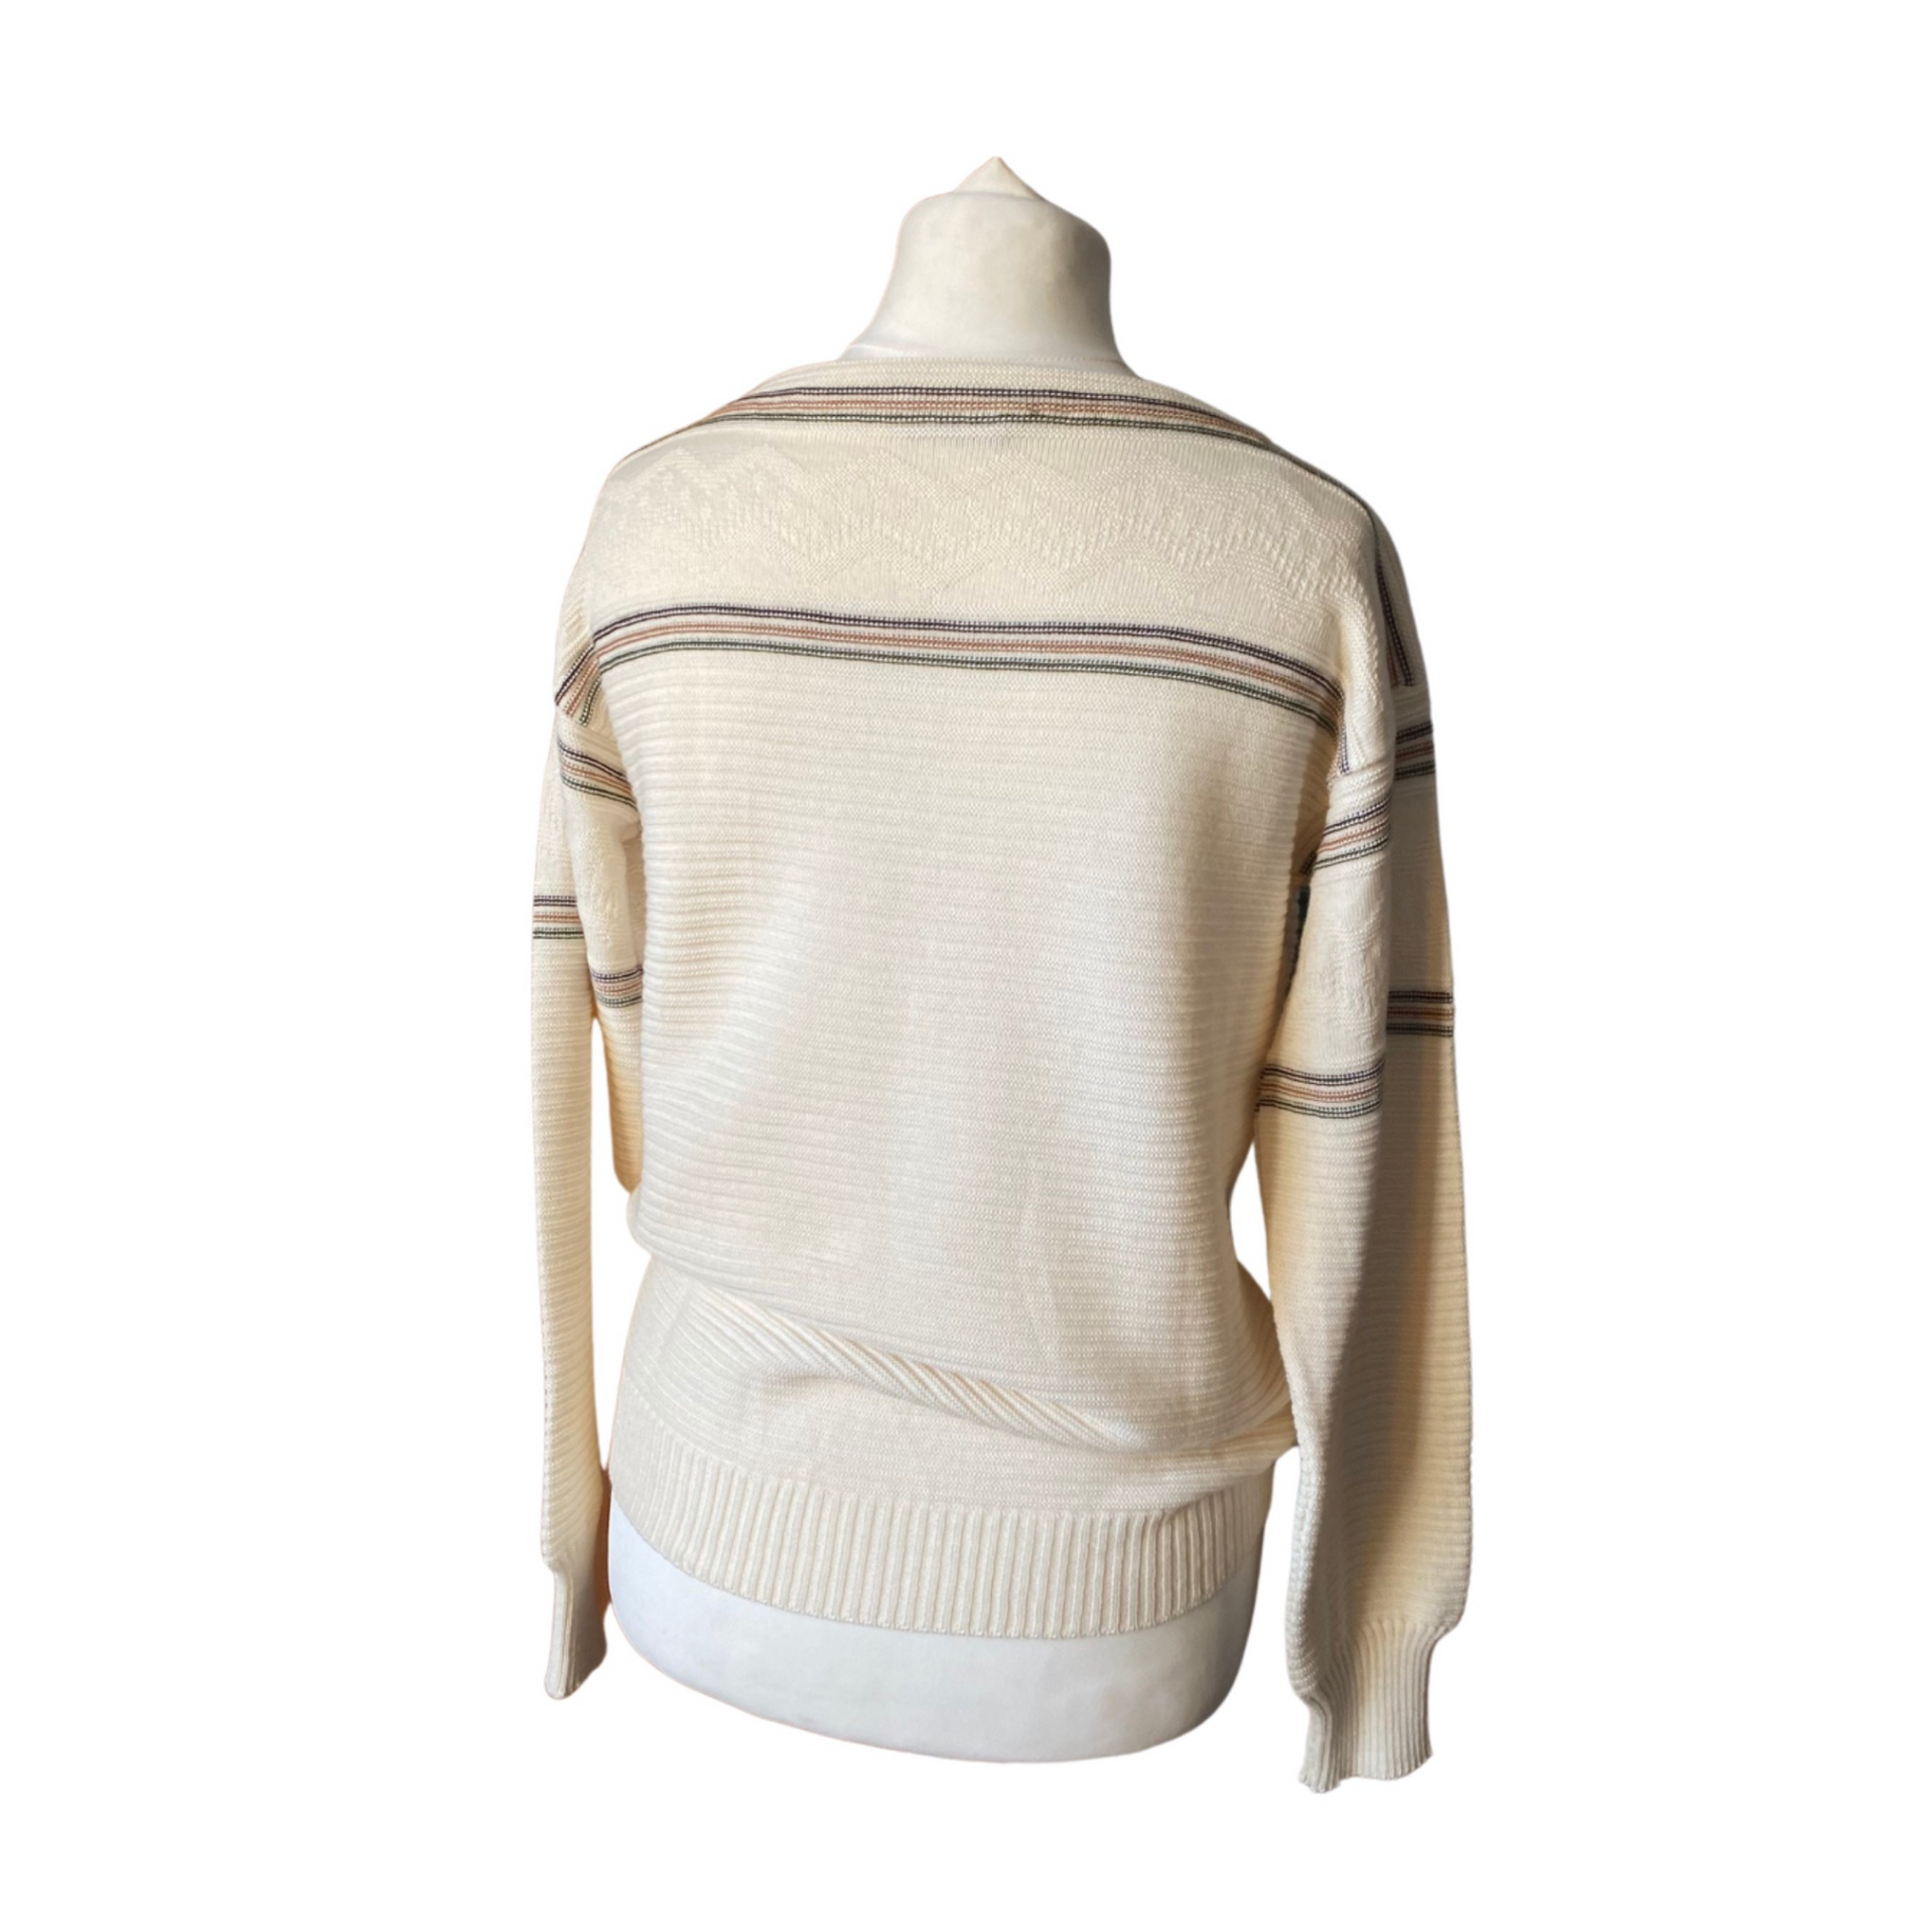 Vintage boatneck sweater with ribbed hem and cuffs - A timeless addition to your wardrobe